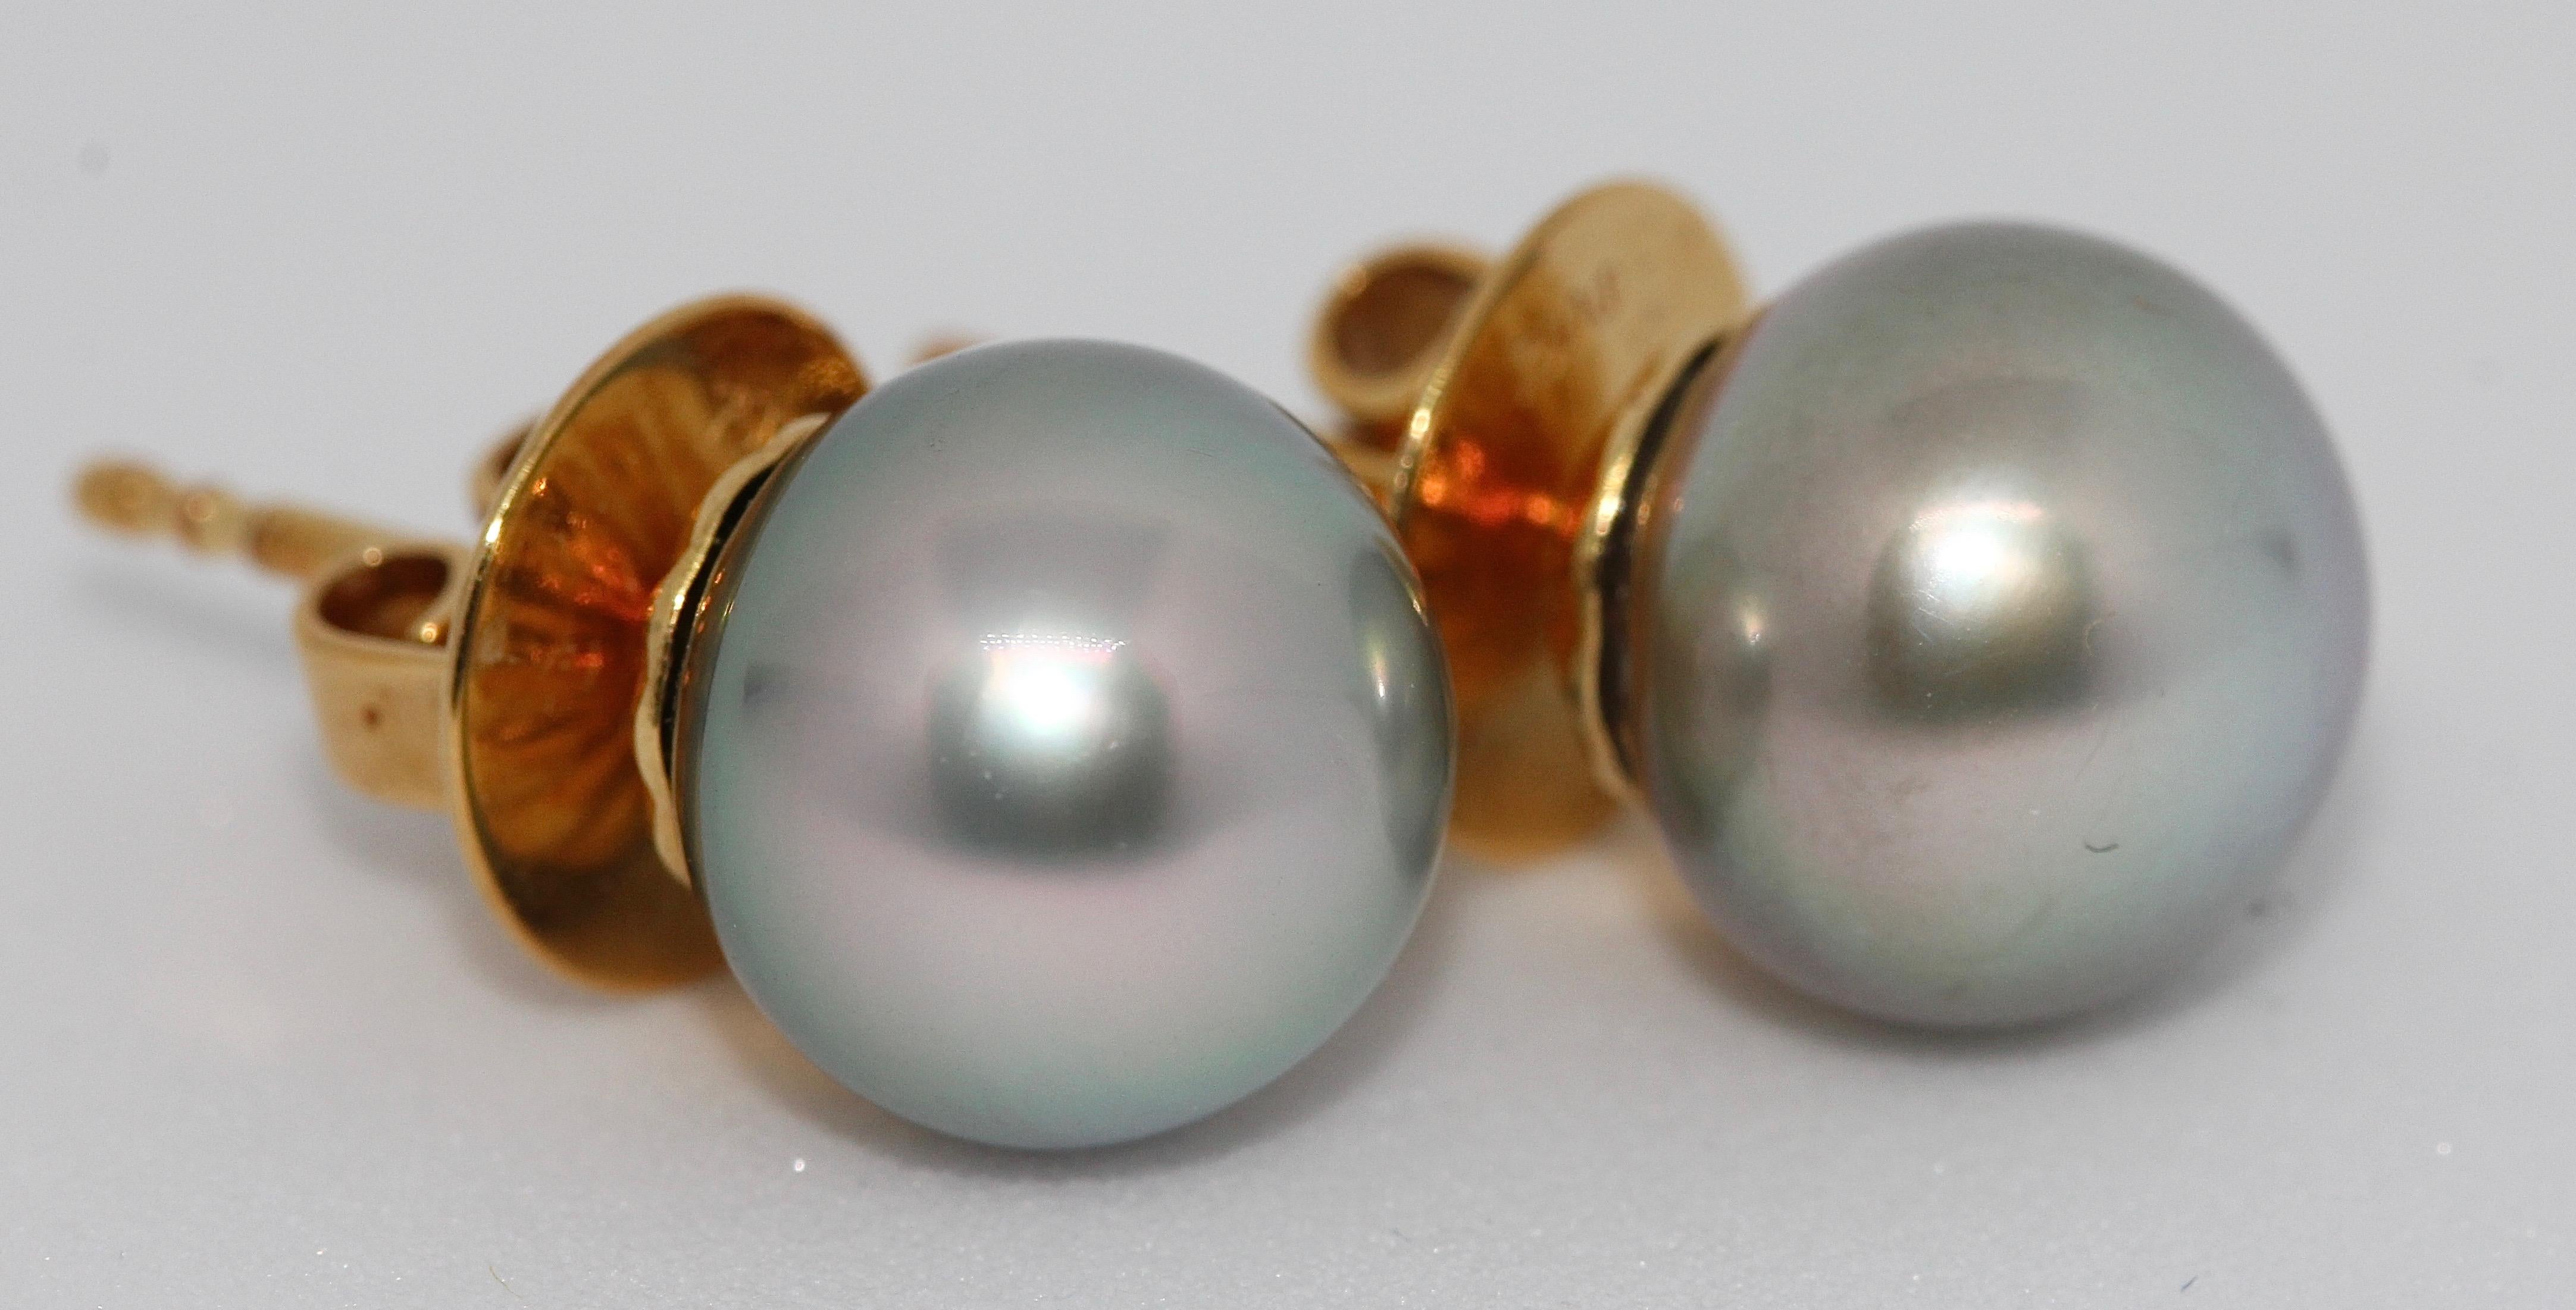 Pretty, natural Tahiti pearl stud earrings. 18ct gold.

The diameter of a pearl is approx. 9mm.